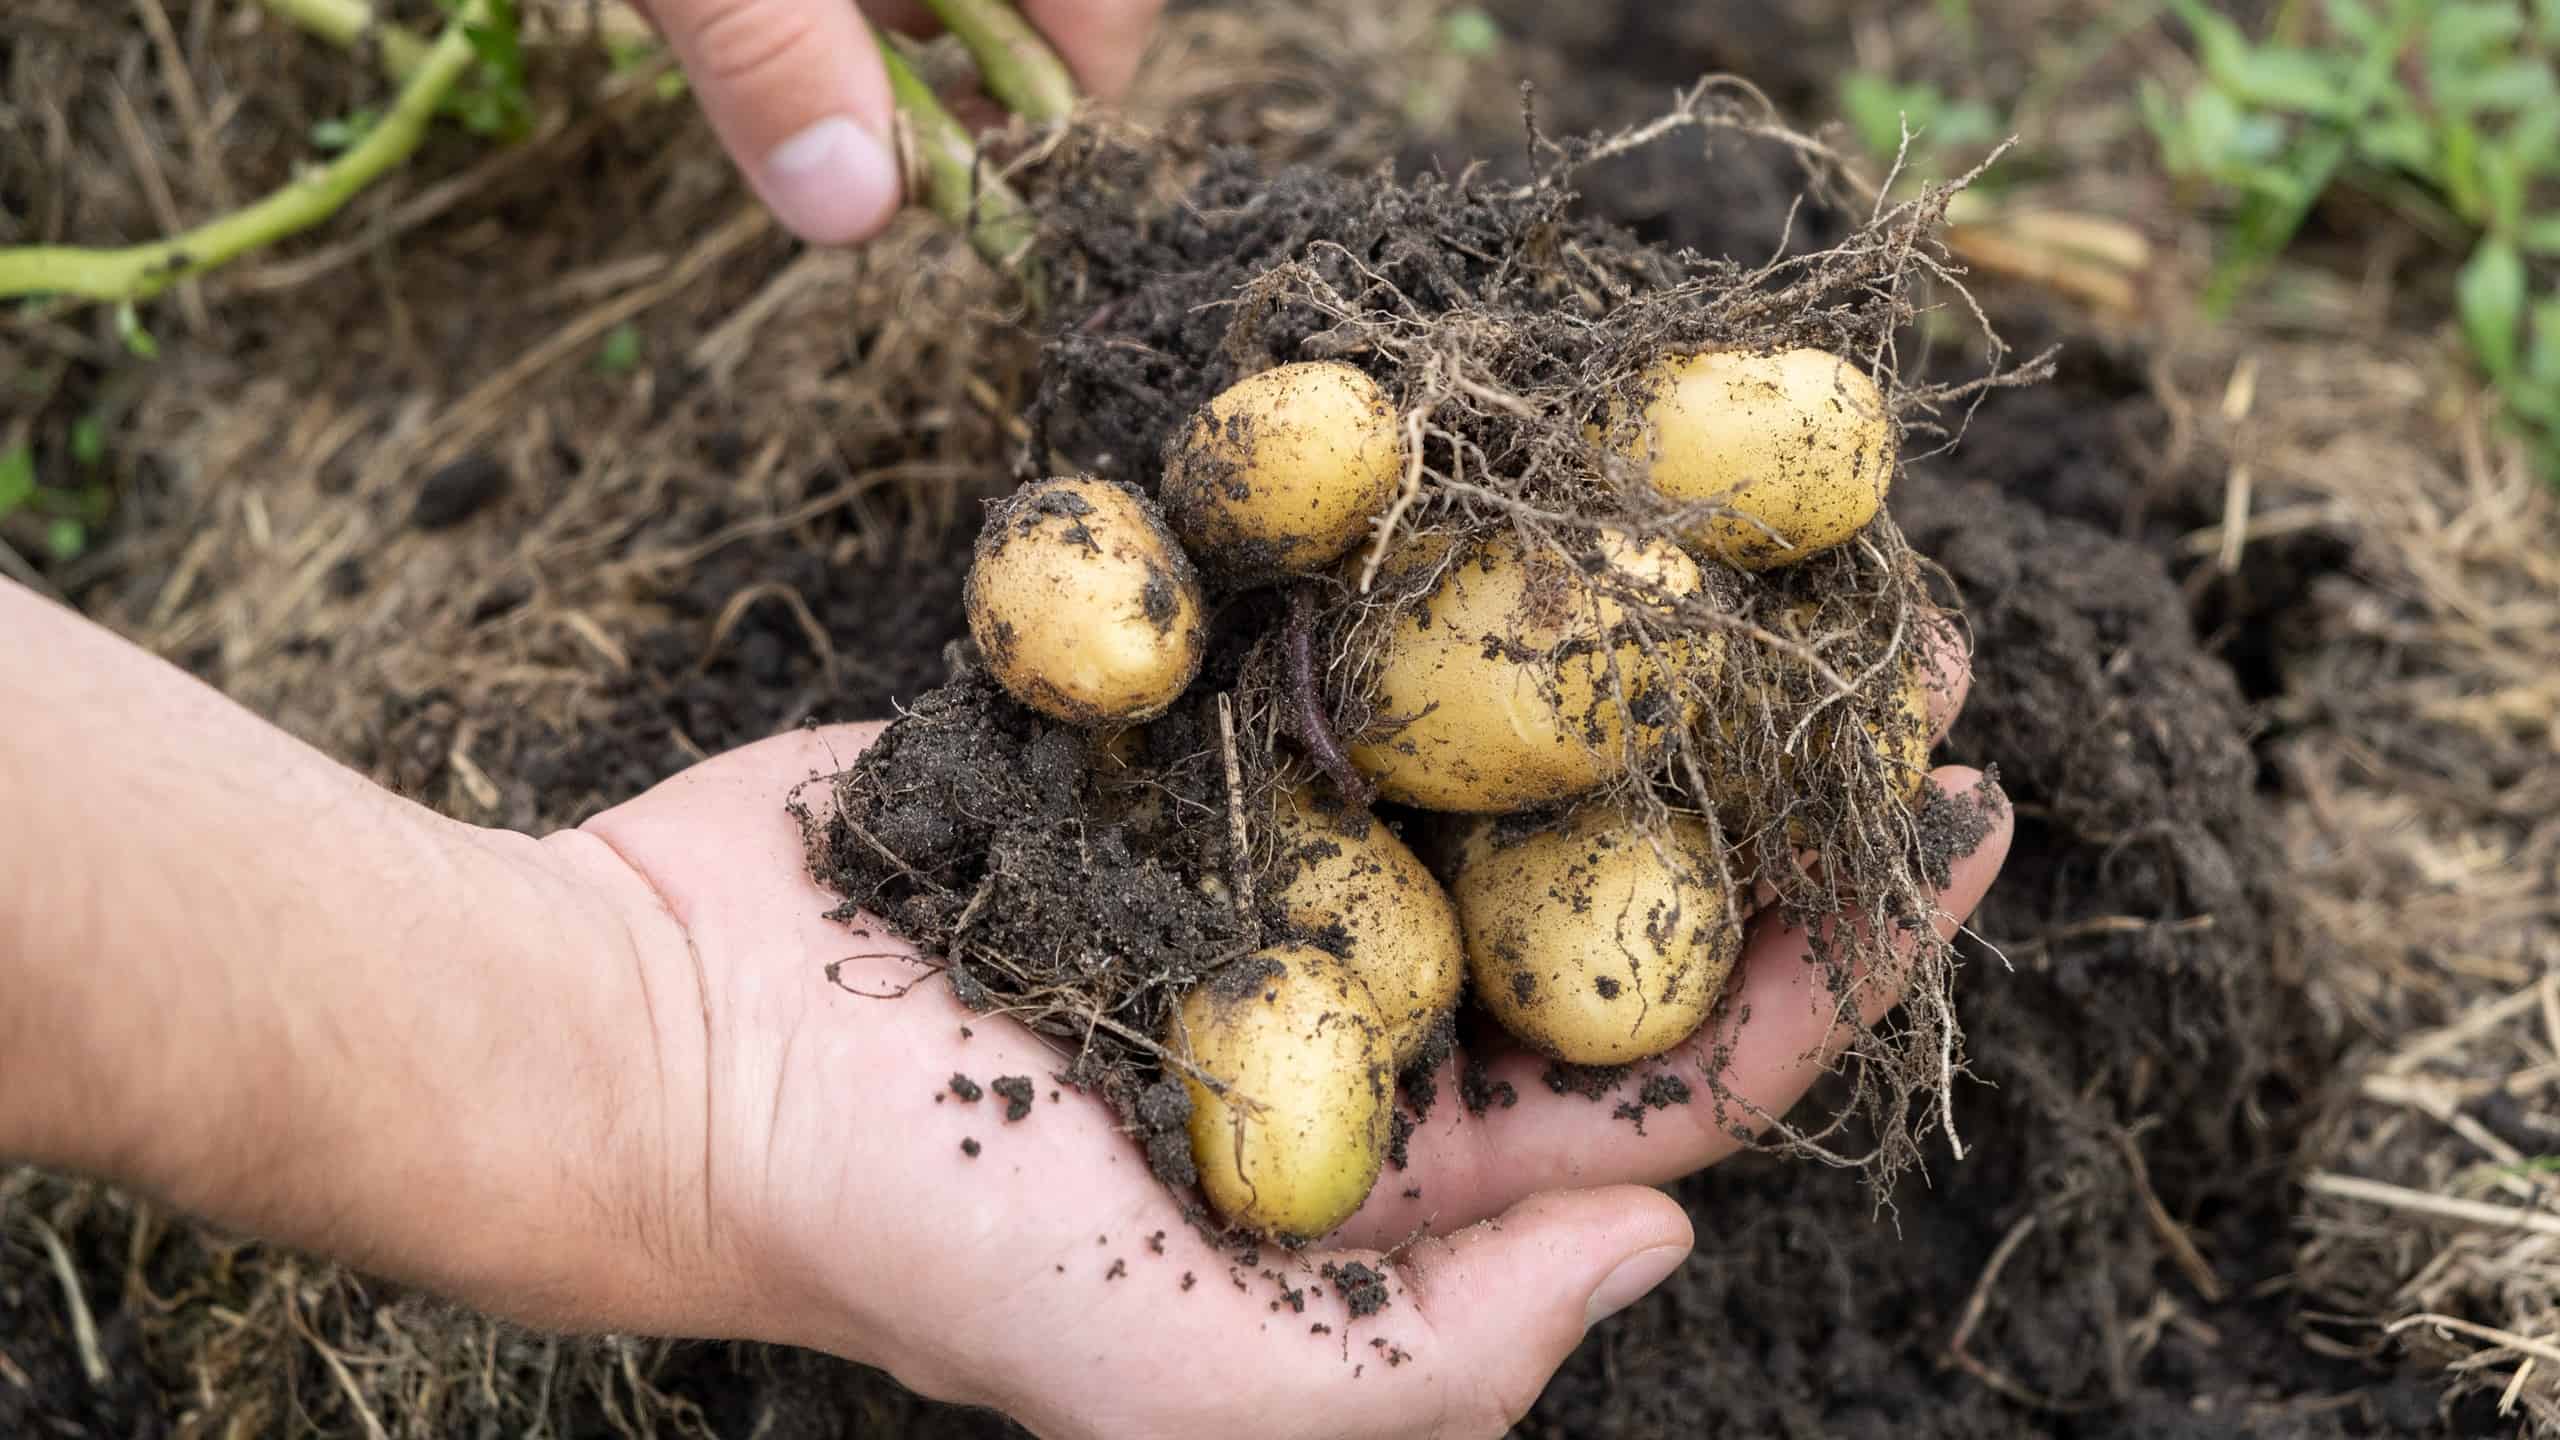 Fresh Baby Potato Crop with earthworm Just Dug Out Of The Ground in farm. man holding dirty potatoes harvest in garden